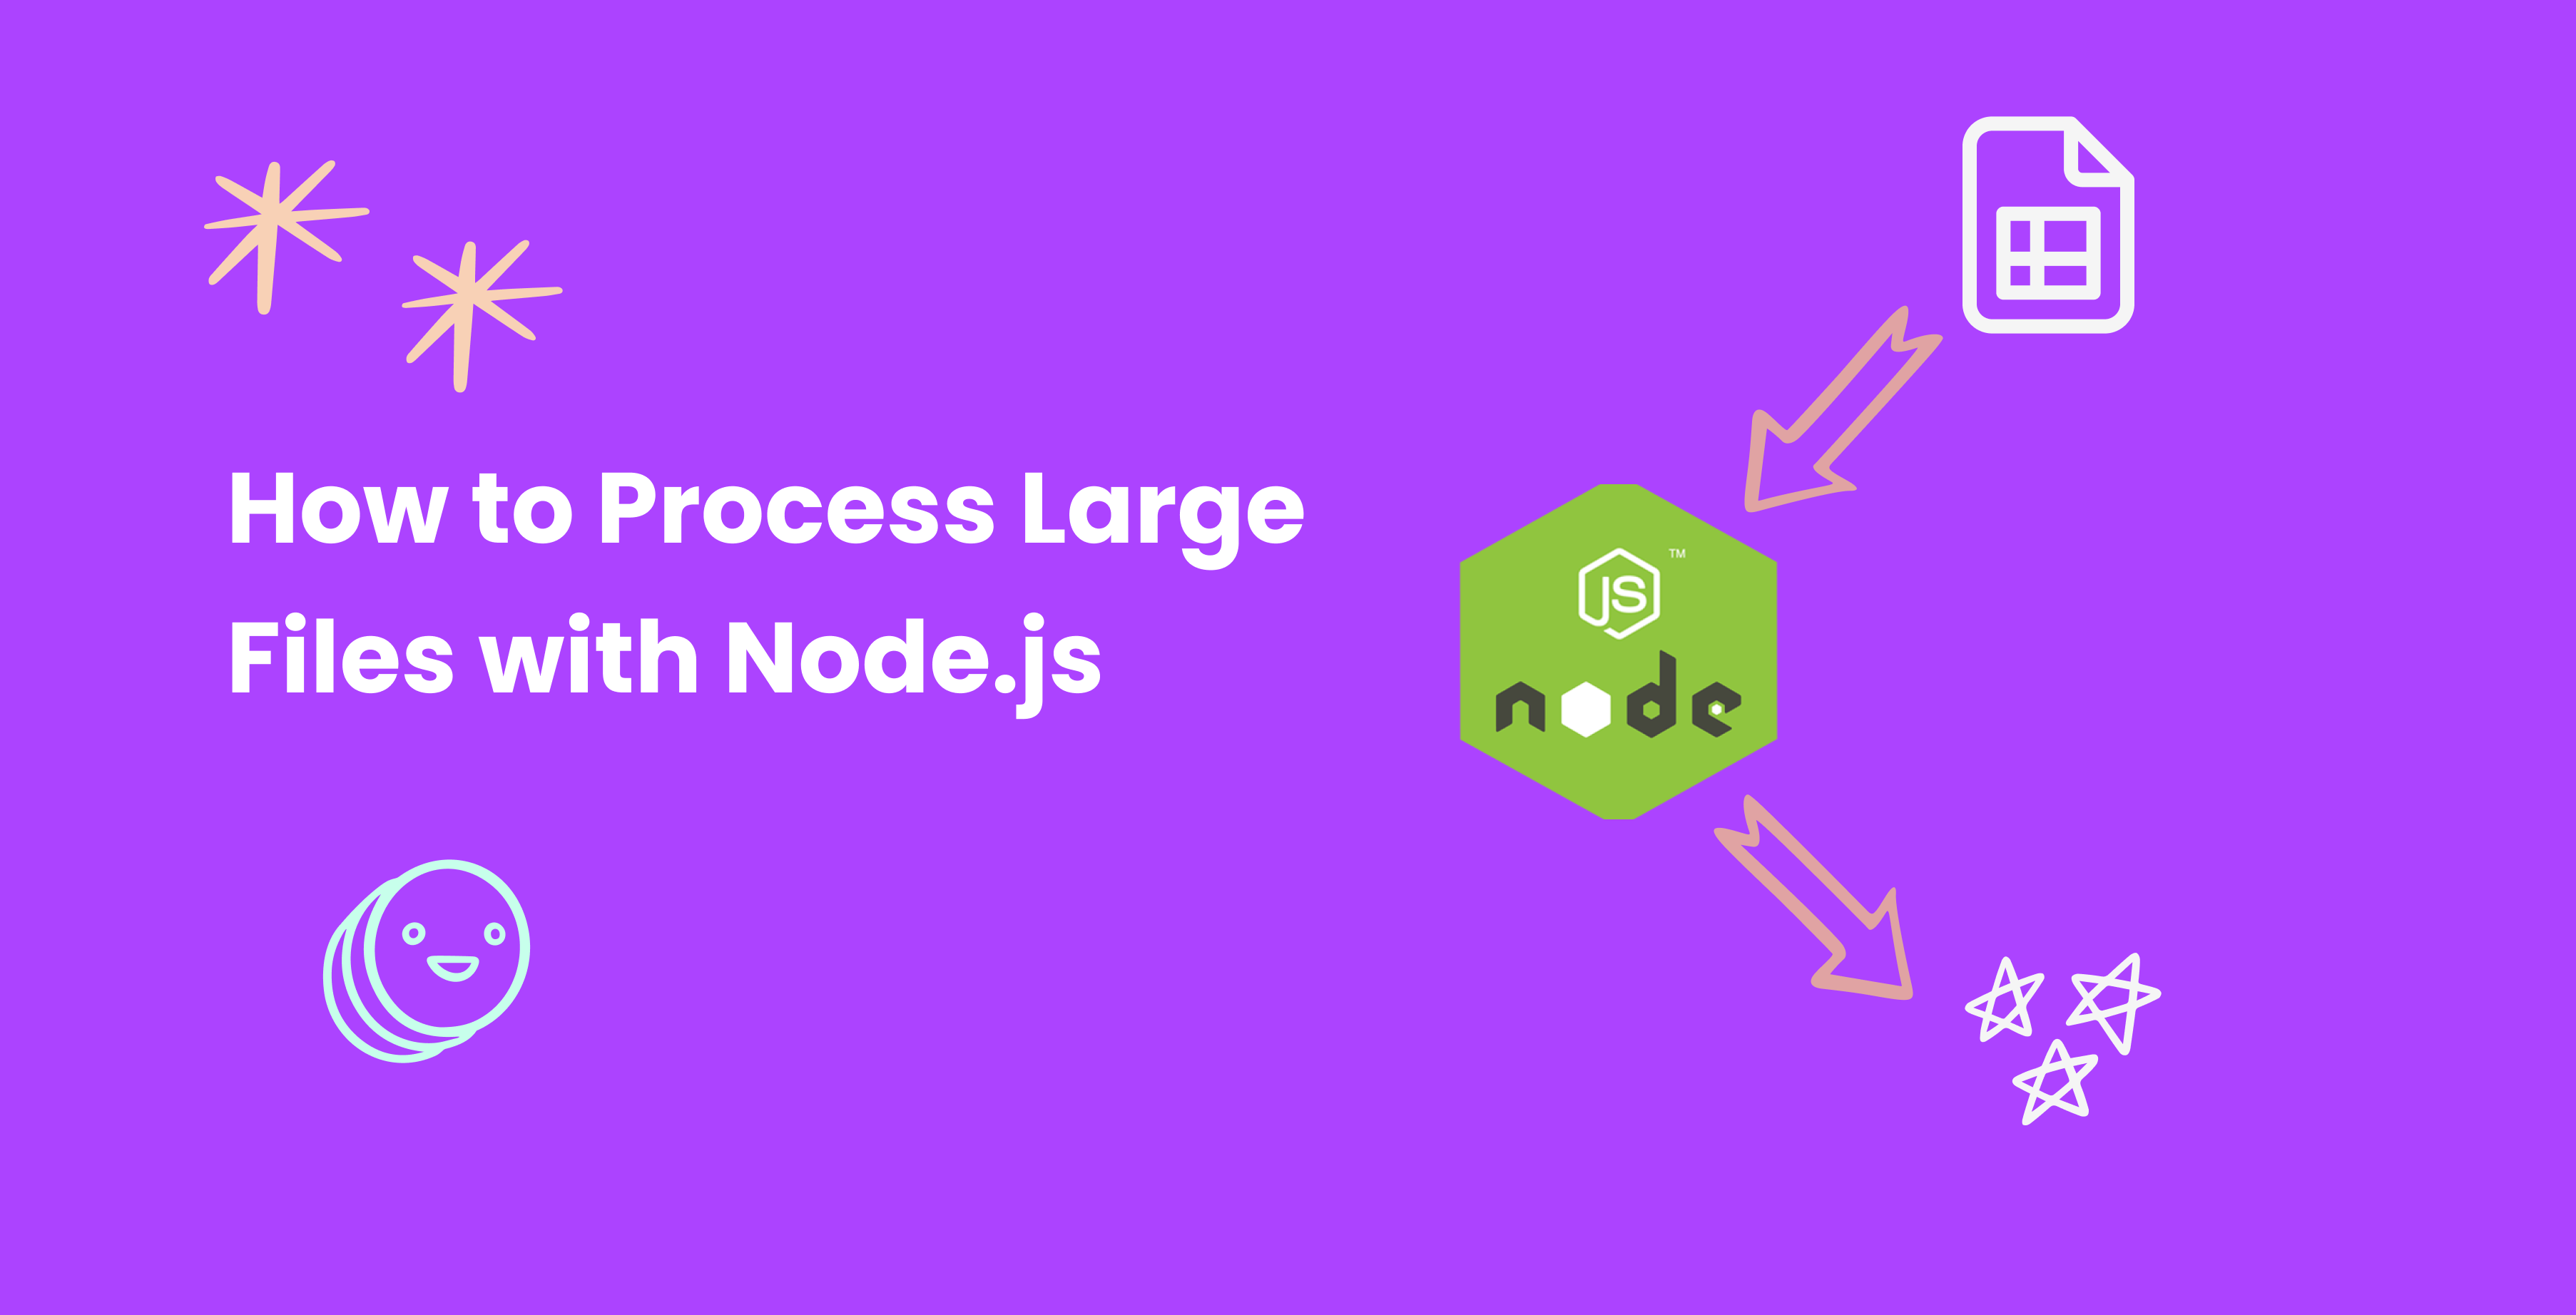 How to Process Large Files with Node.js